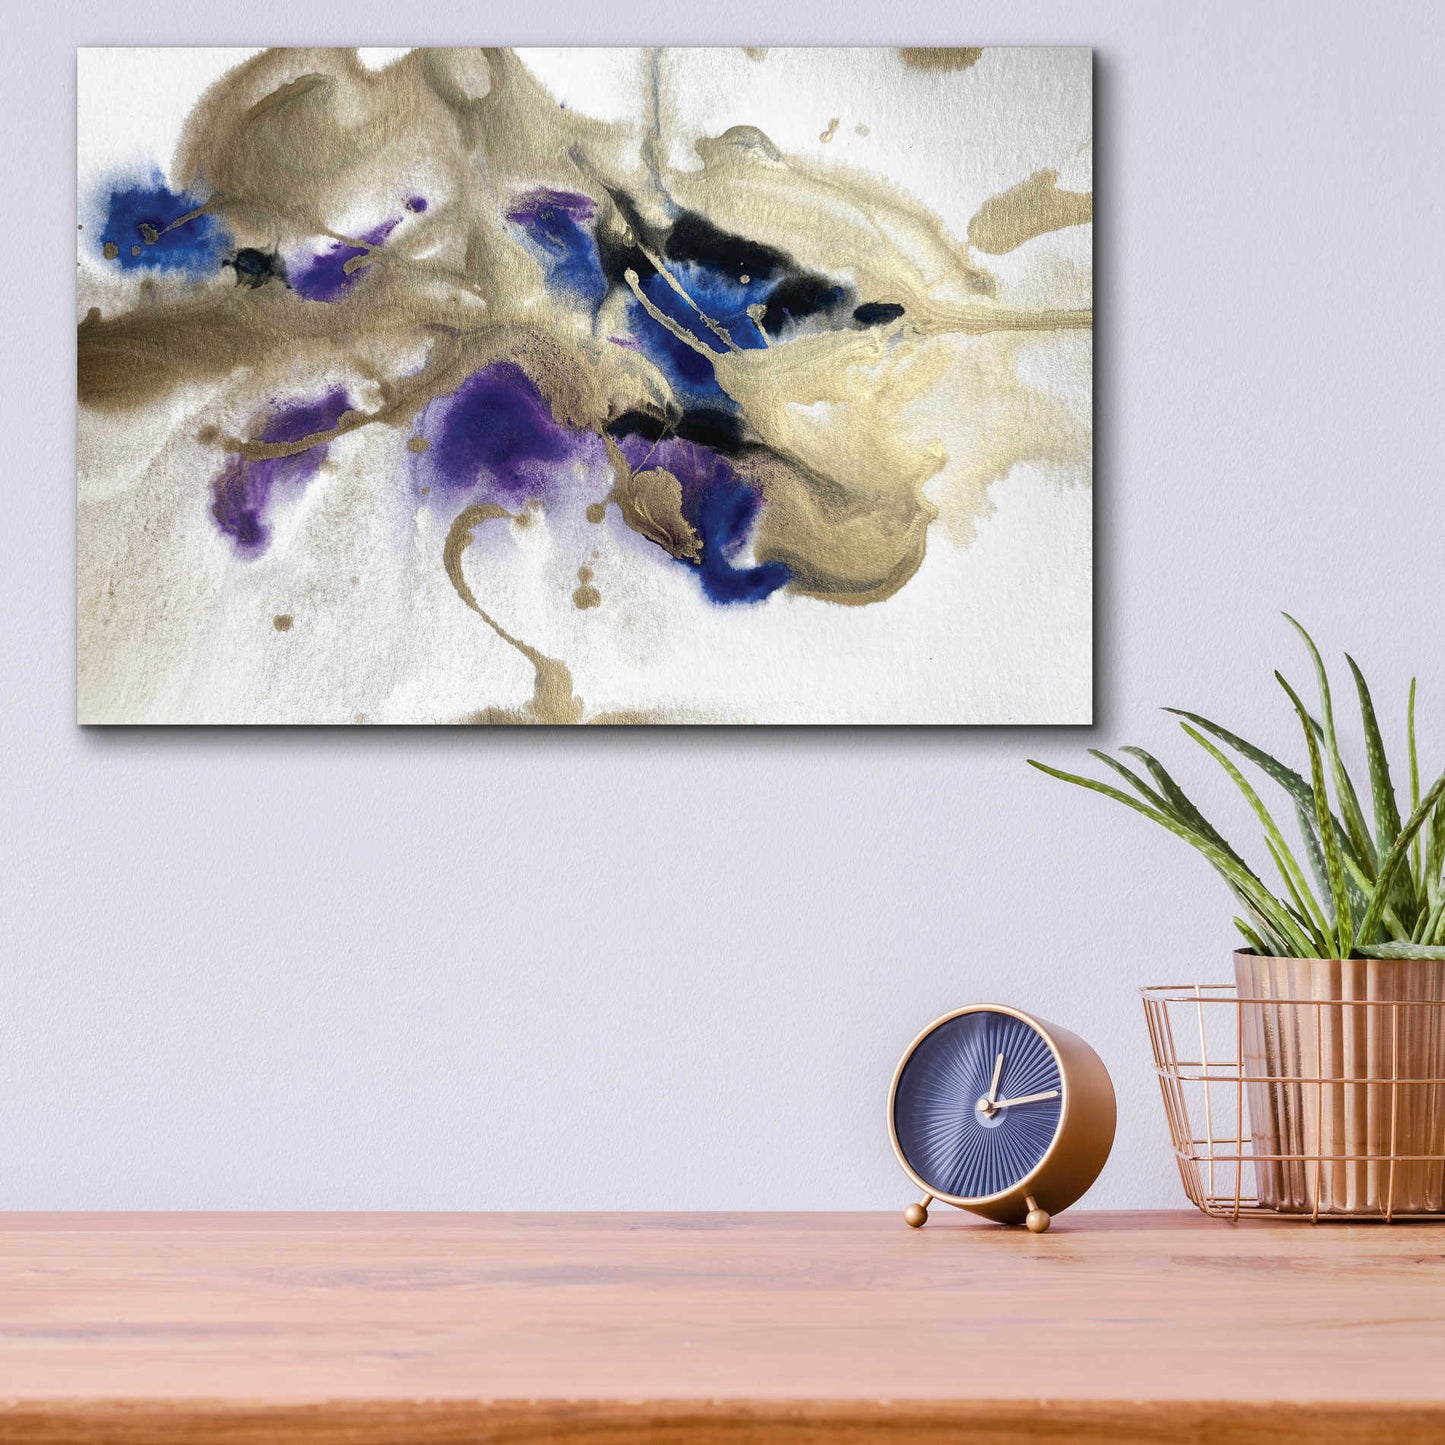 Epic Art 'Gold In Blue Watercolor Abstract 2' by Irena Orlov Acrylic Glass Wall Art,16x12